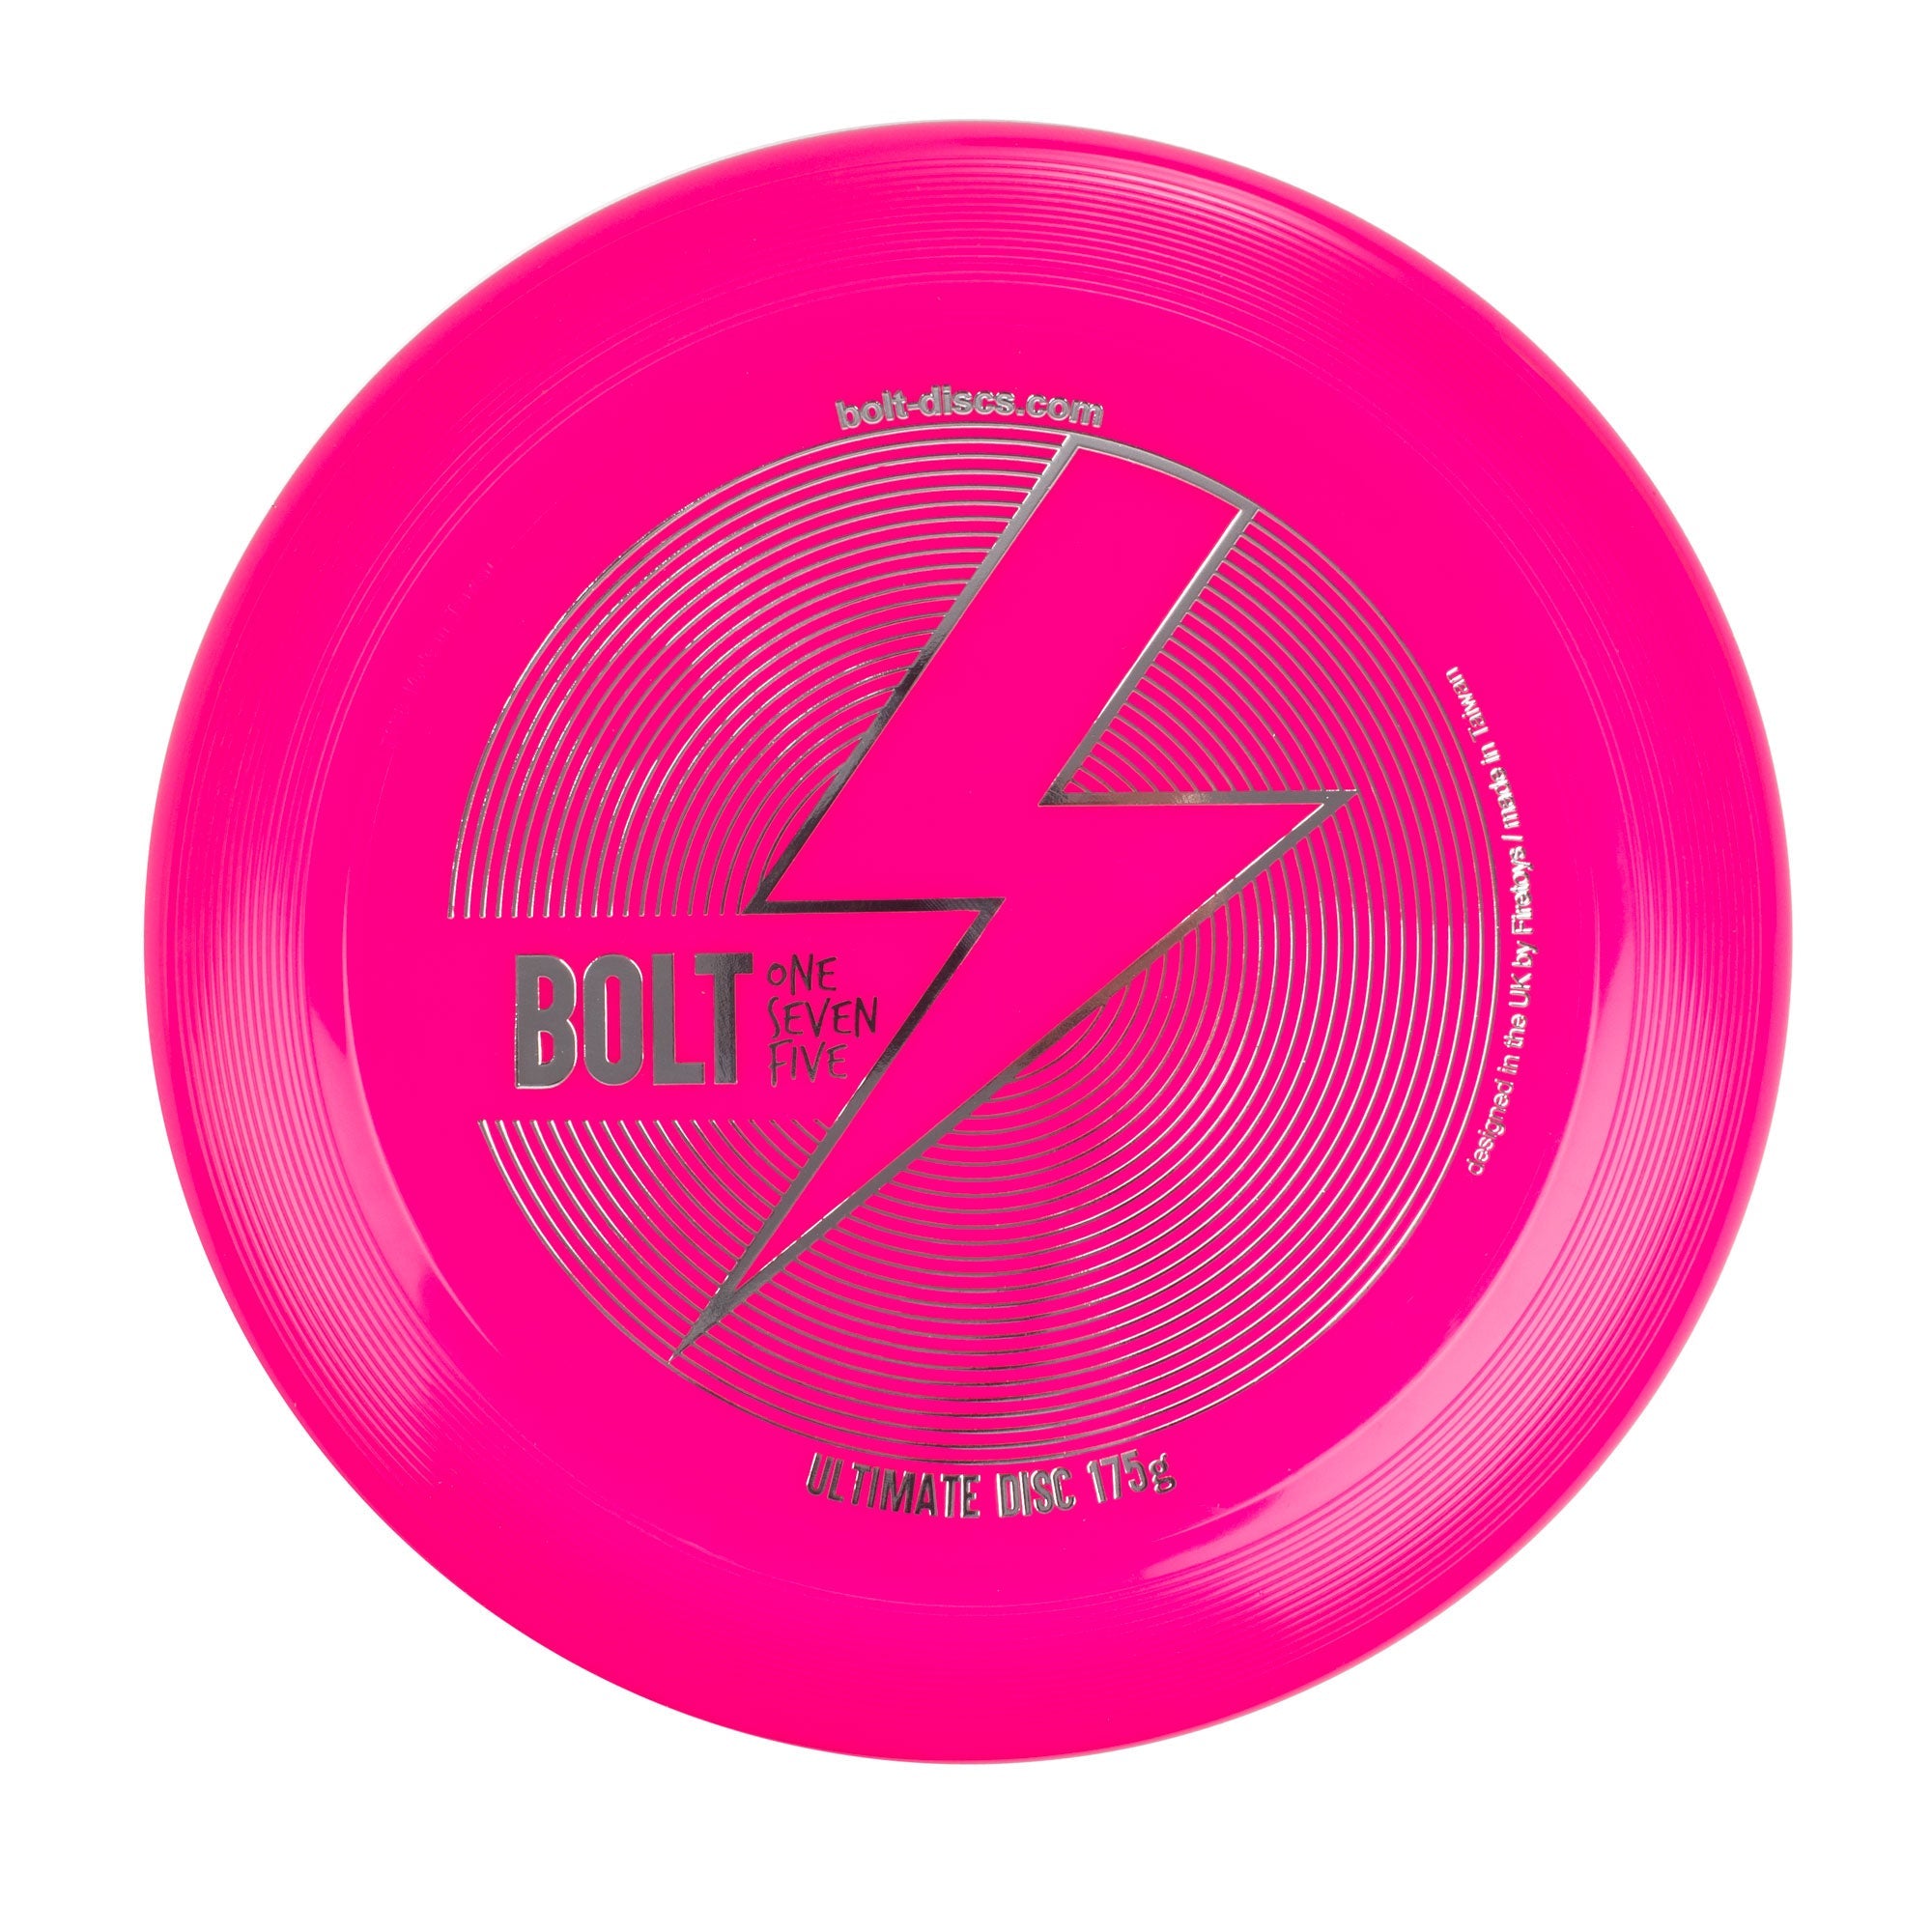 Pink BOLT frisbee from a front angle